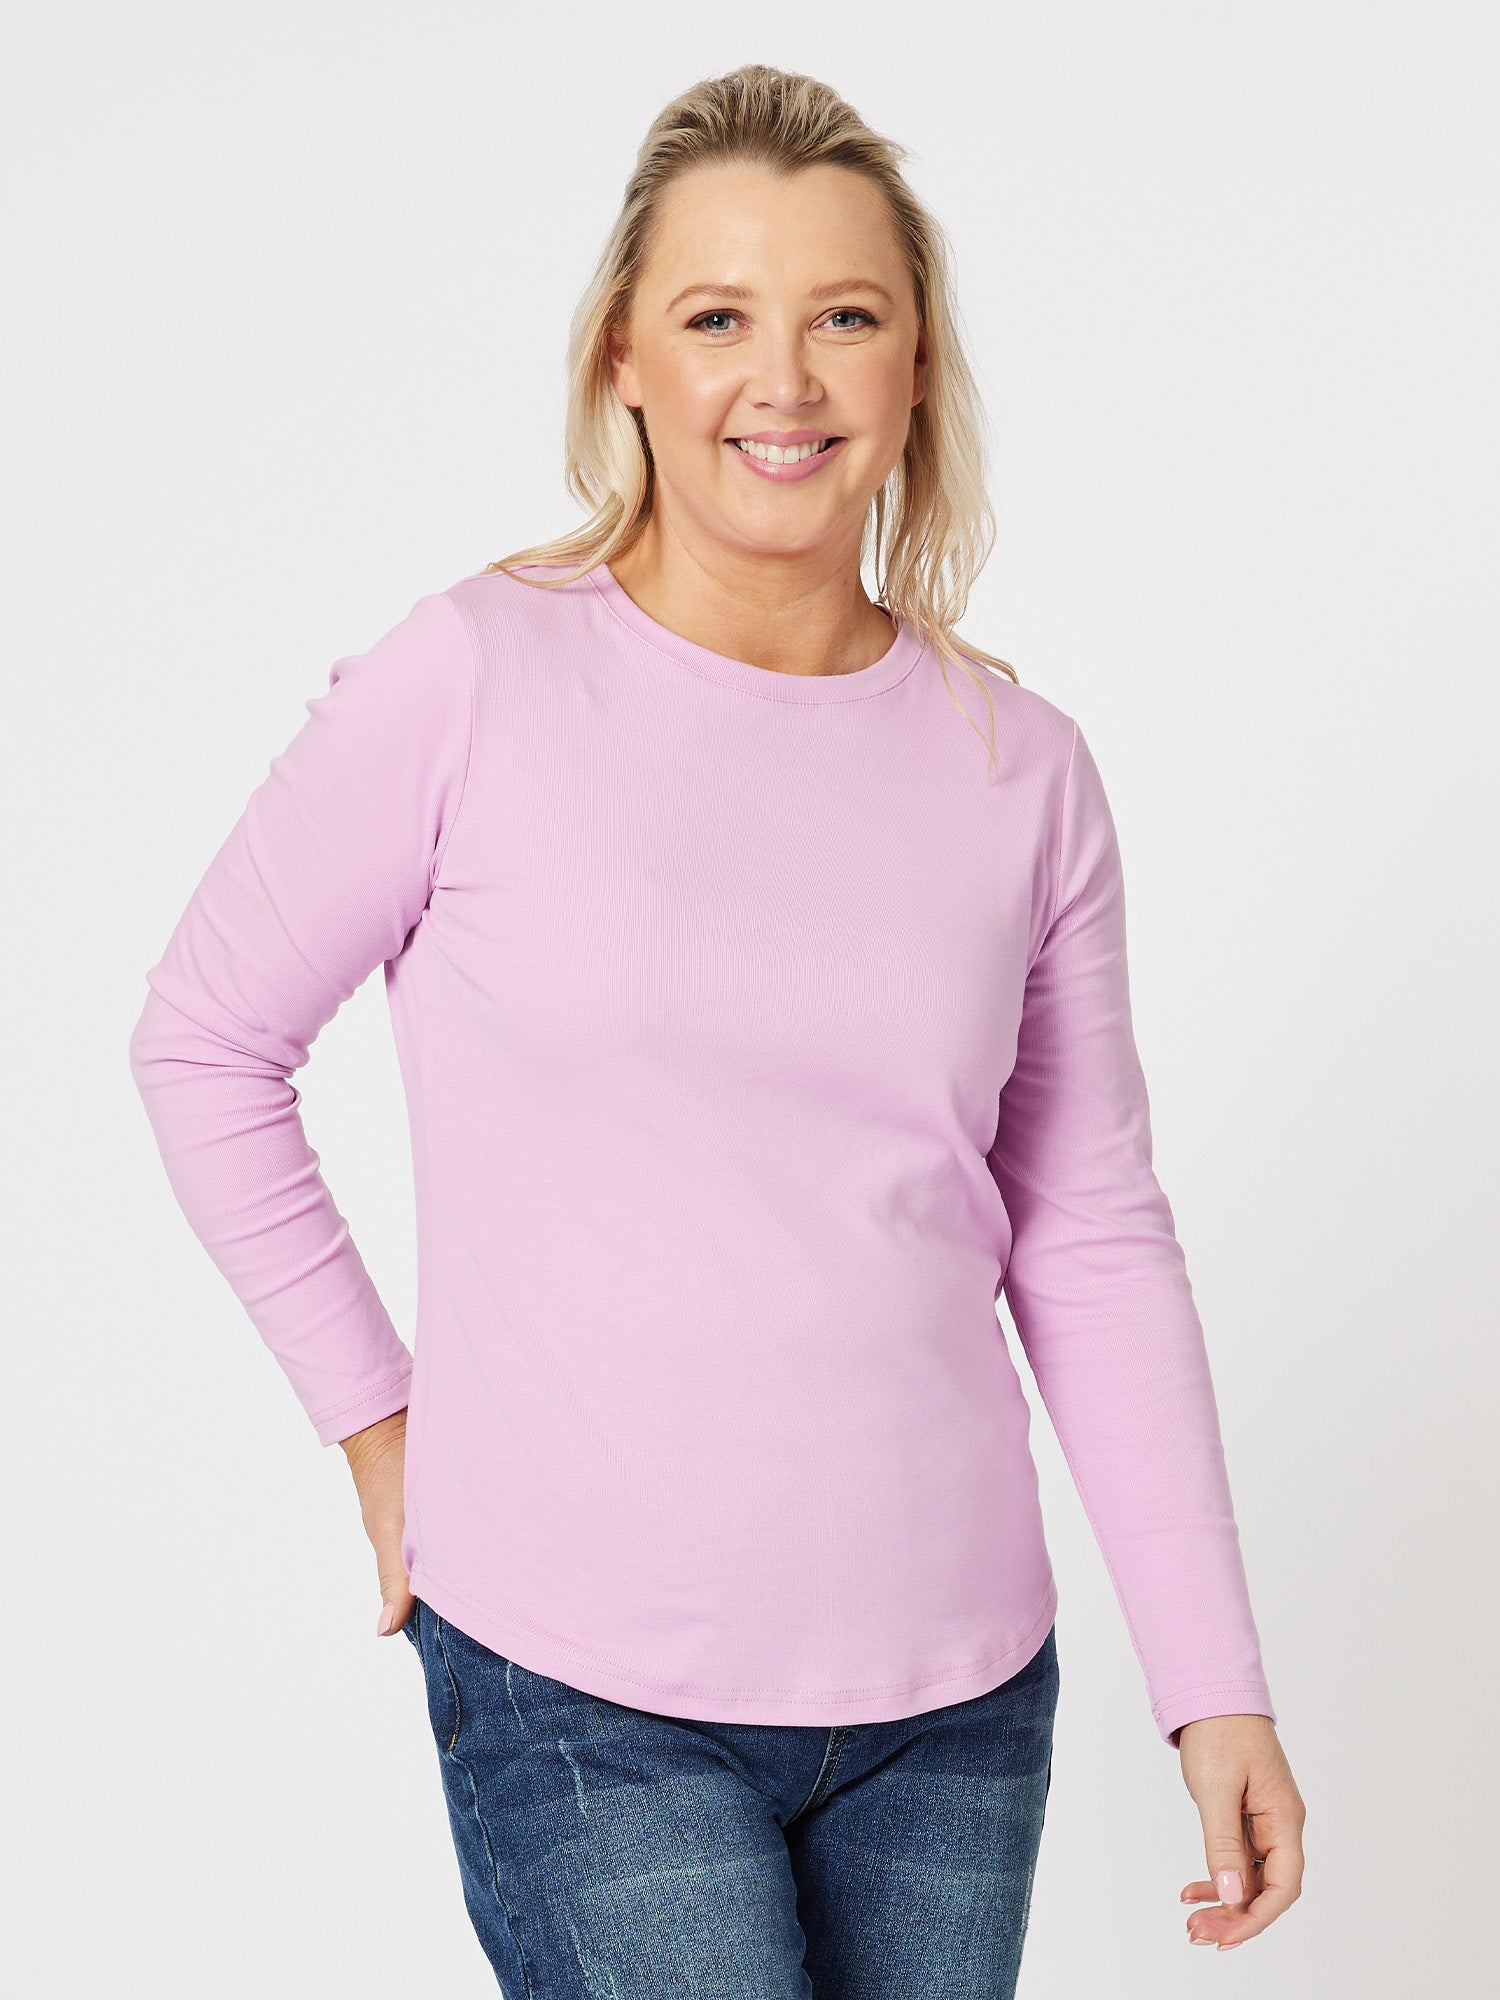 Crew Neck Cotton Rib Long Sleeve Top - Orchid